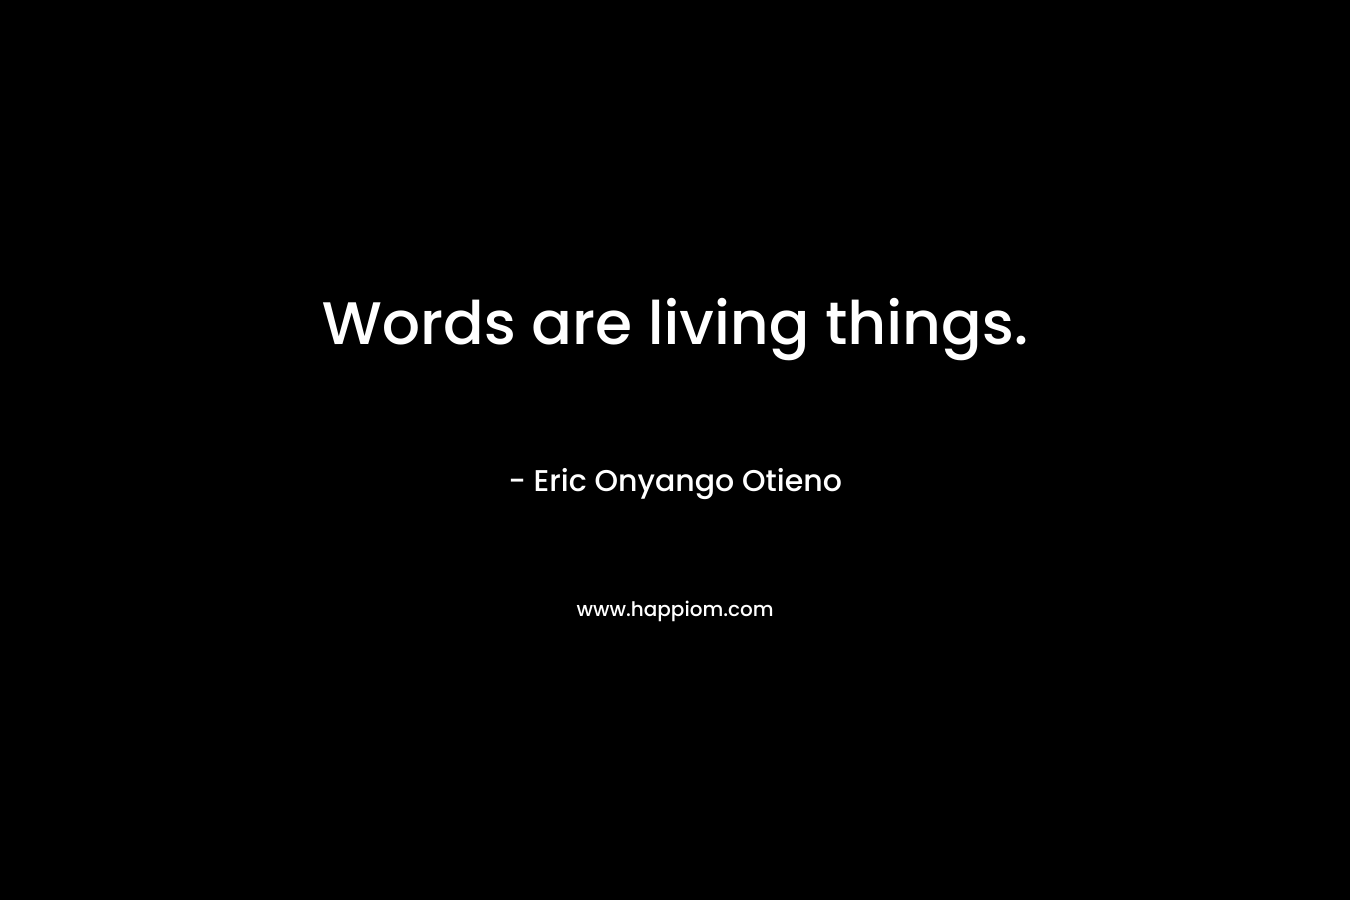 Words are living things.